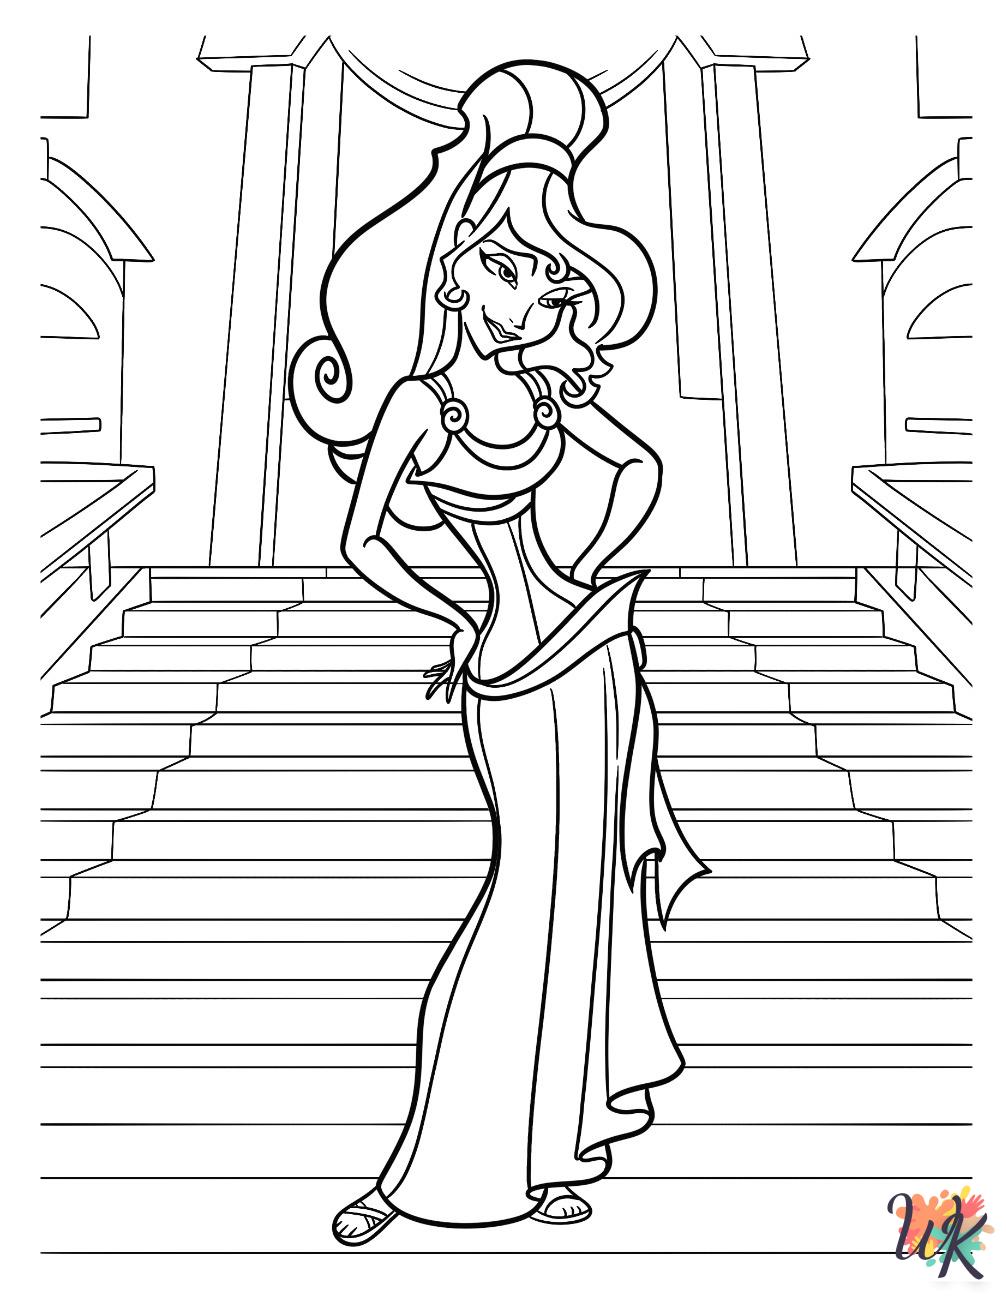 Hercules coloring pages printable